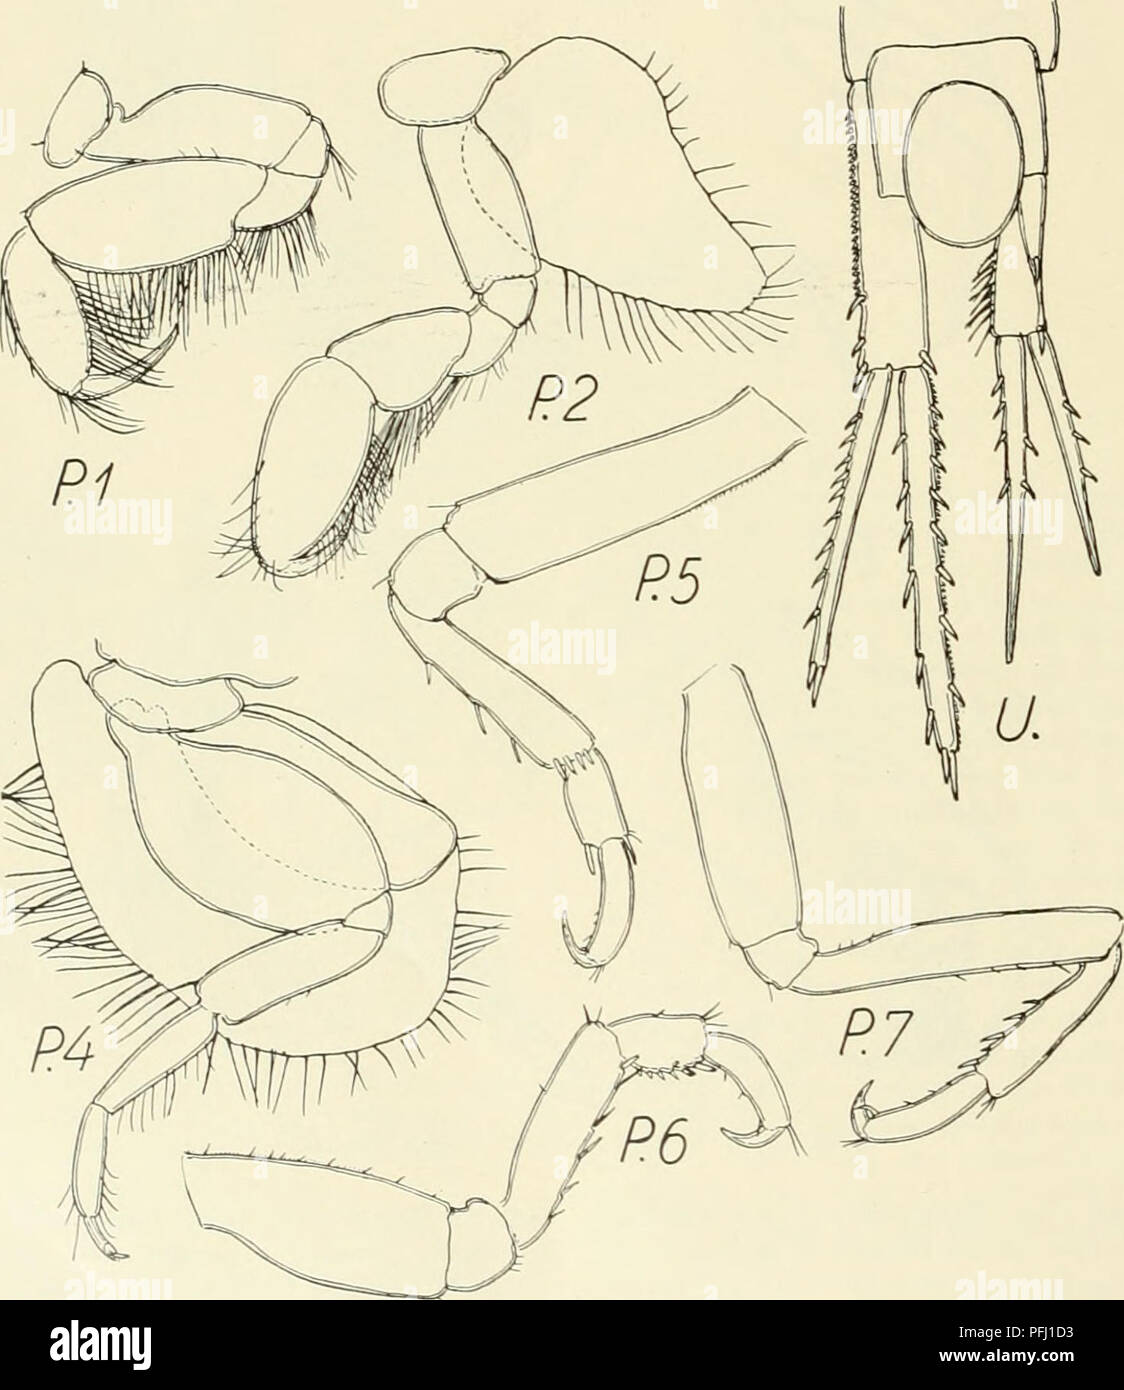 . The Danish Ingolf-expedition. Marine animals -- Arctic regions; Scientific expeditions; Arctic regions. Fig. 33. Duliehia spinosa $ and young $ (J = young specimen).. Fig. 34. Duliehia spinosa $. in D. porrecta. Antennae 1-2 lost. Pereiopod 1, side plate rather small, rounded rectangular, without spiniform process; 5th joint very broad, ov • 1V2 times as broad as the oblong oval next joint. Pereiopod 2, side plate has a long spiniform process, two thirds the length of second joint: second joint long, distally with a rounded lobe; 6th joint in length equal to second joint, broad, with a large Stock Photo